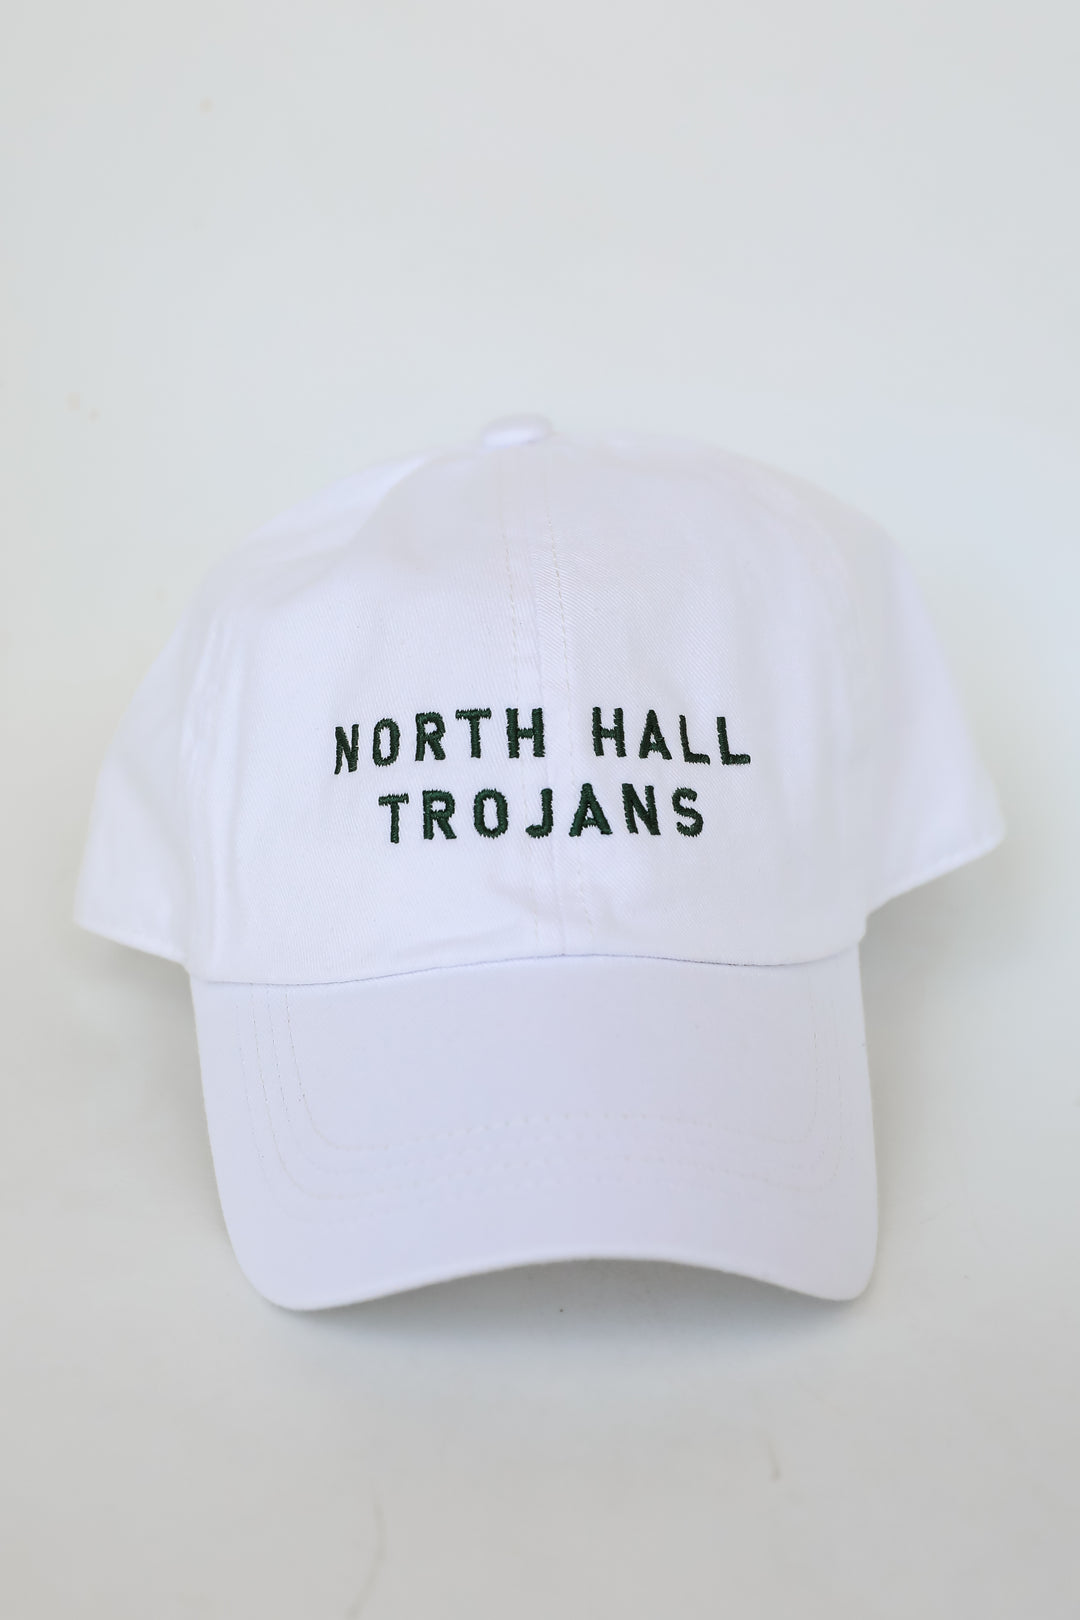 North Hall Trojans Embroidered Hat